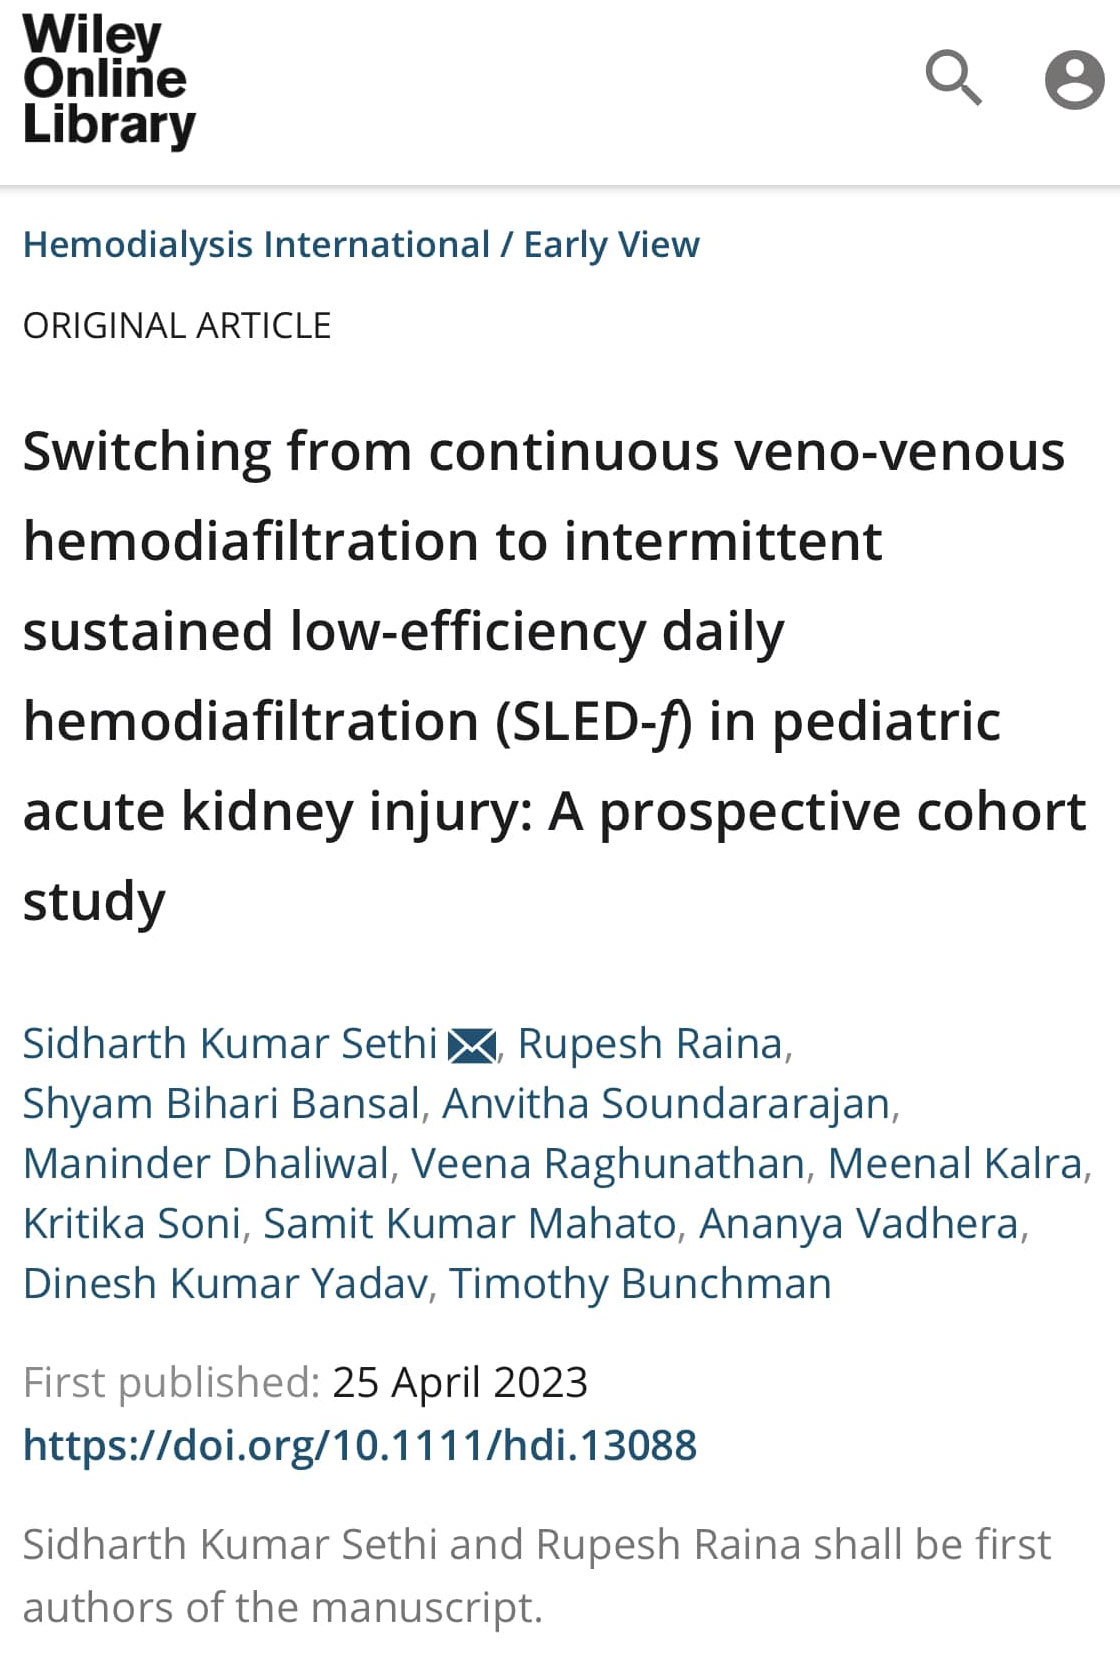 Switching from continuous veno-venous hemodiafiltration to intermittent sustained low-efficiency daily hemodiafiltration (SLED-f) in pediatric acute kidney injury: A prospective cohort study